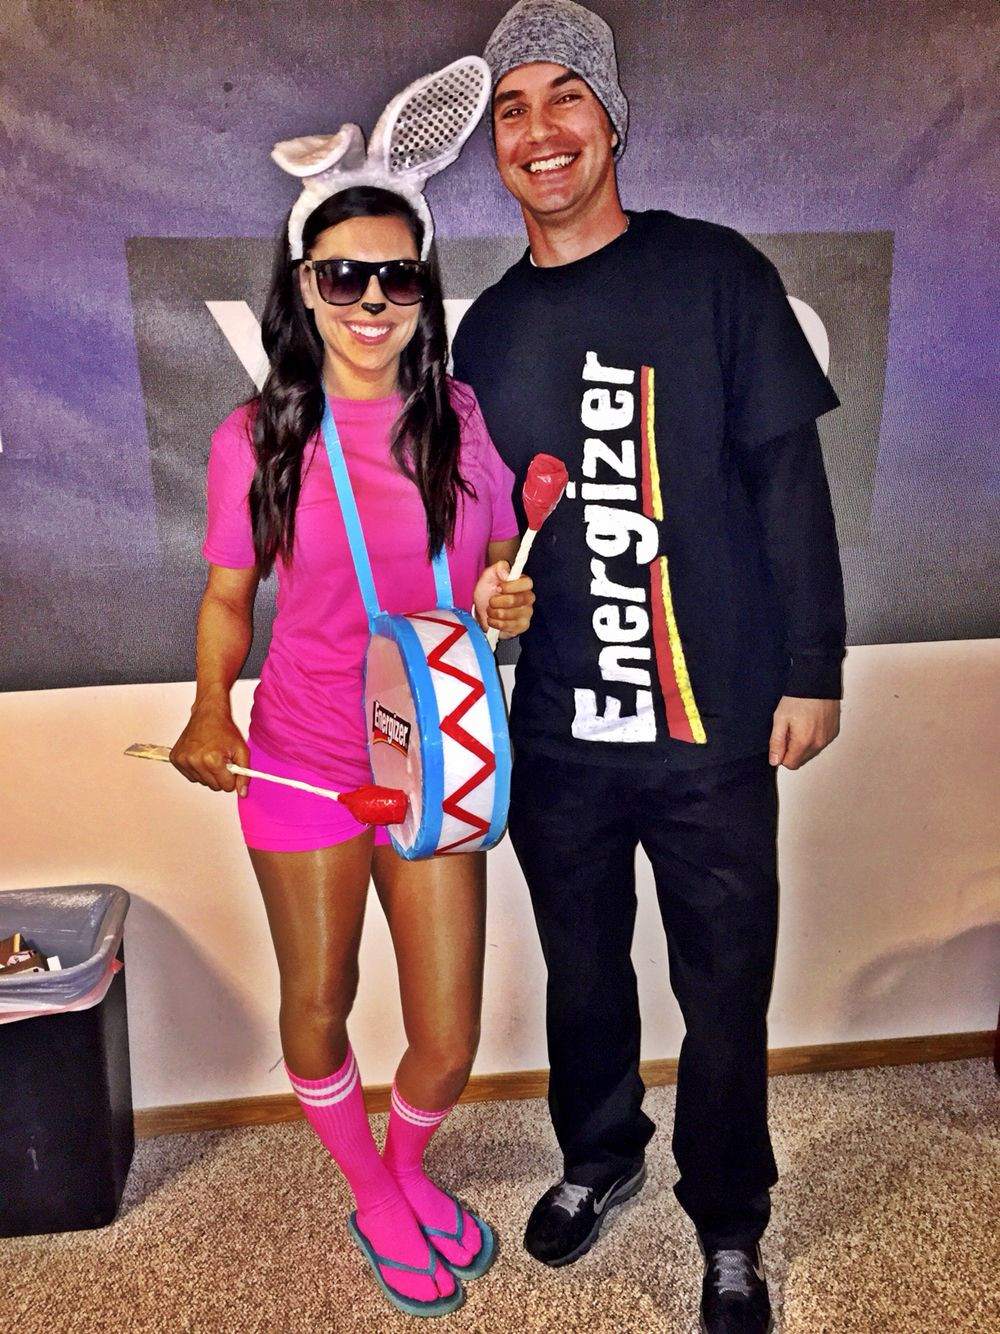 DIY Couple Costumes
 20 Best DIY Couples Halloween Costumes That Can Be Worn in